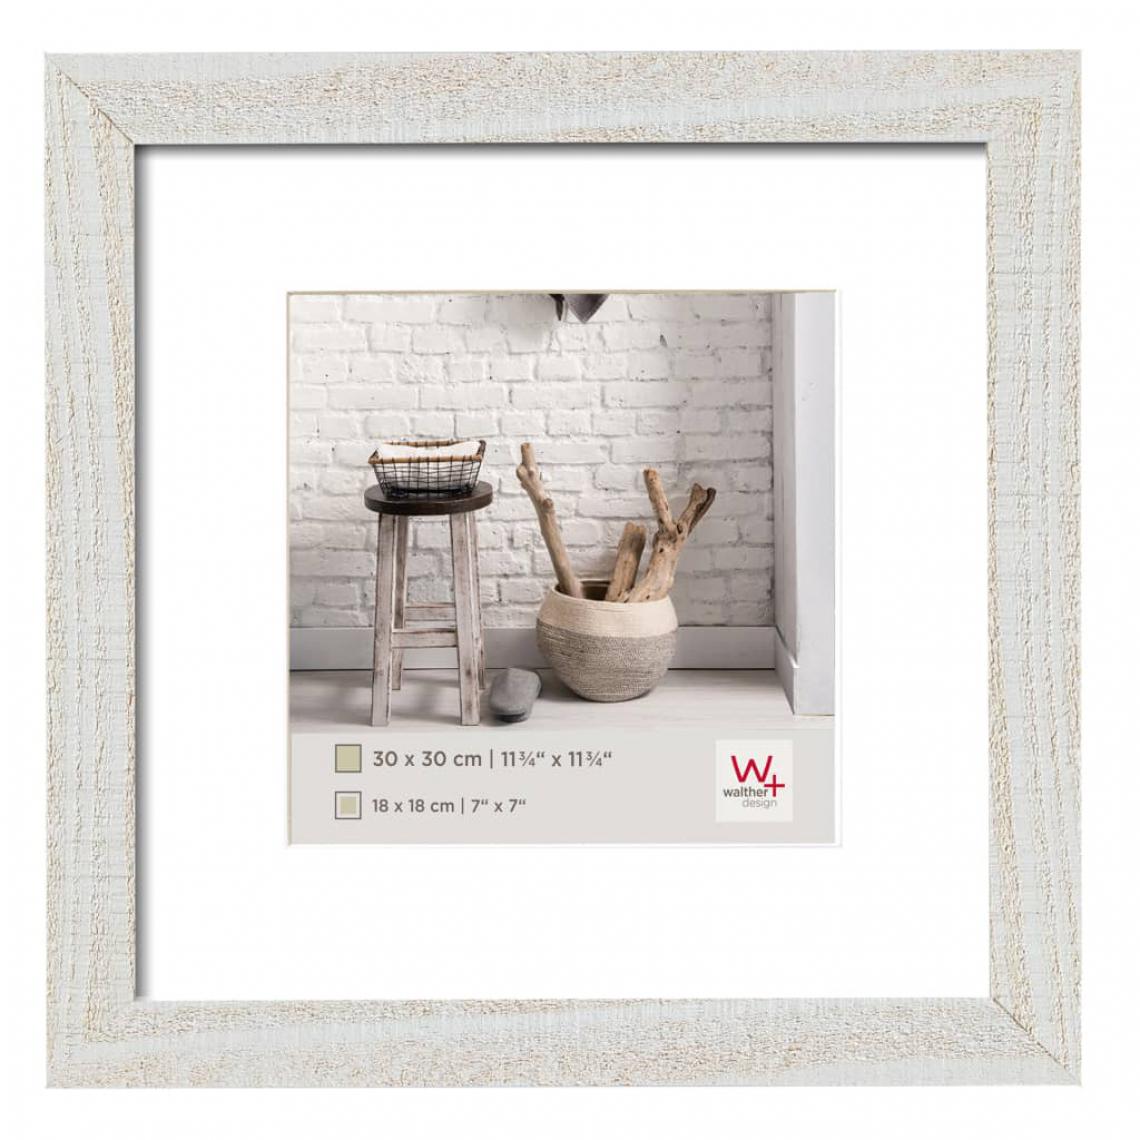 Walther - Walther Design Cadre photo Home 30x30 cm Blanc polaire - Cadres, pêle-mêle